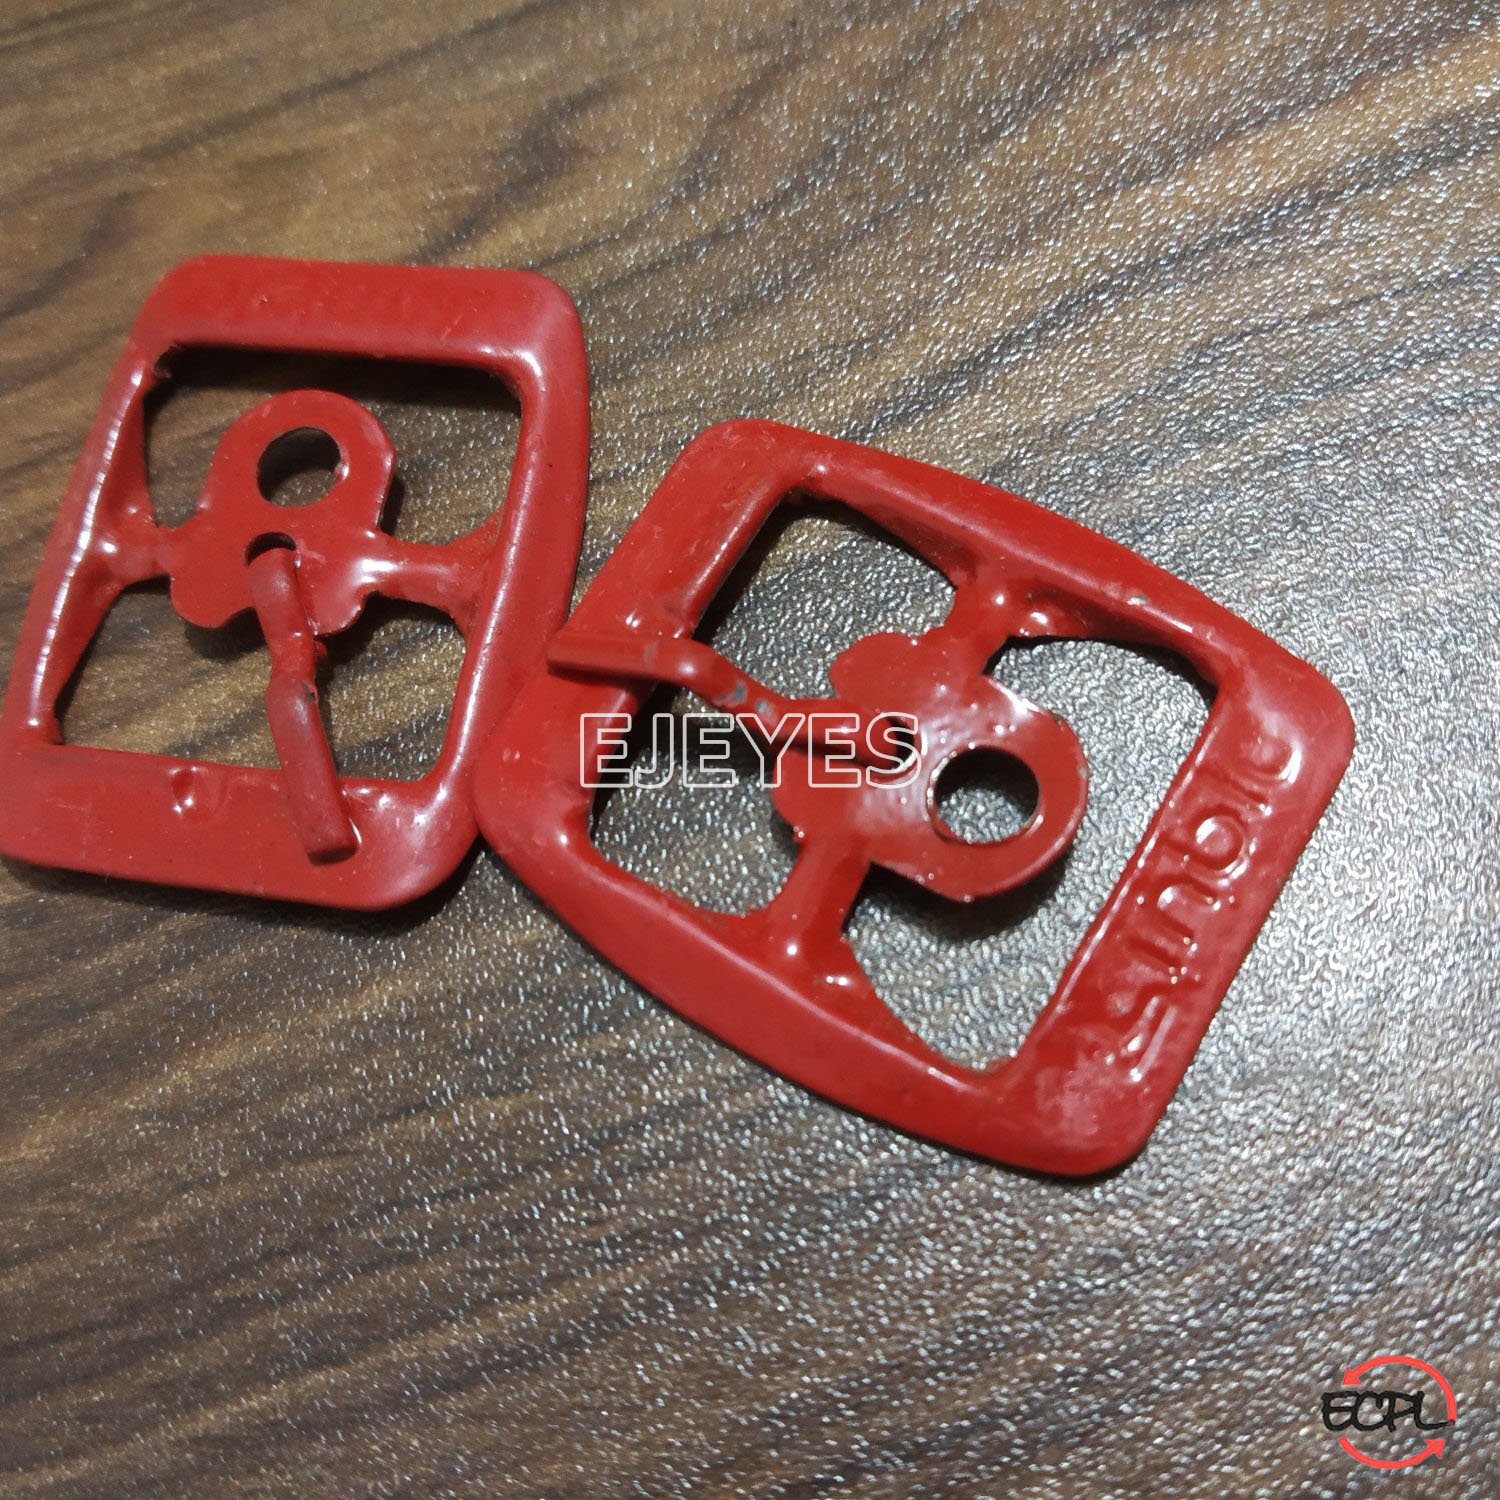 Red 18mm steel buckle: A stylish and durable hardware accessory, adding a pop of color to your projects.